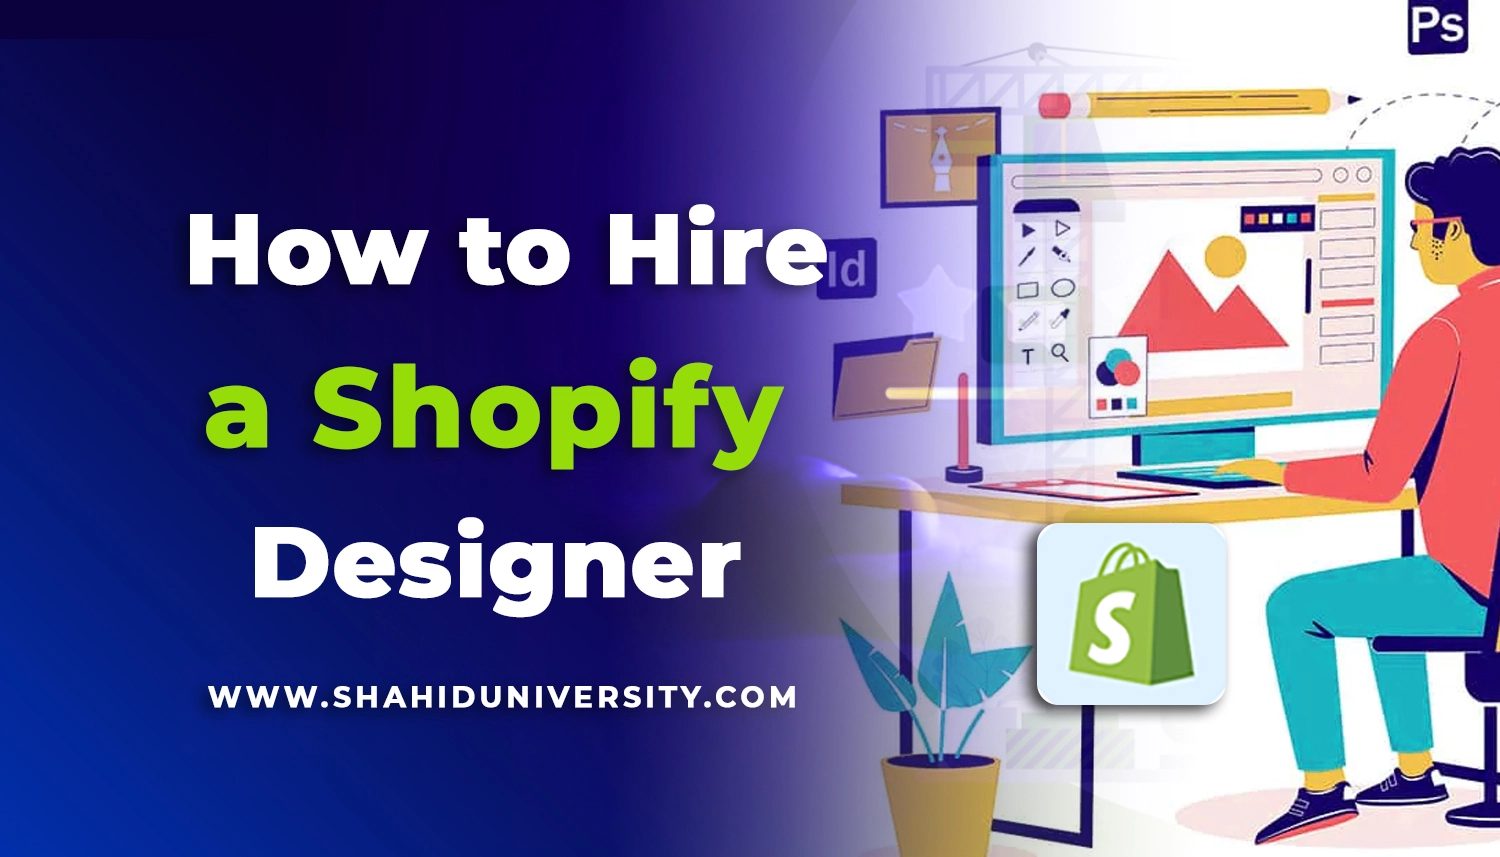 How to Hire a Shopify Designer